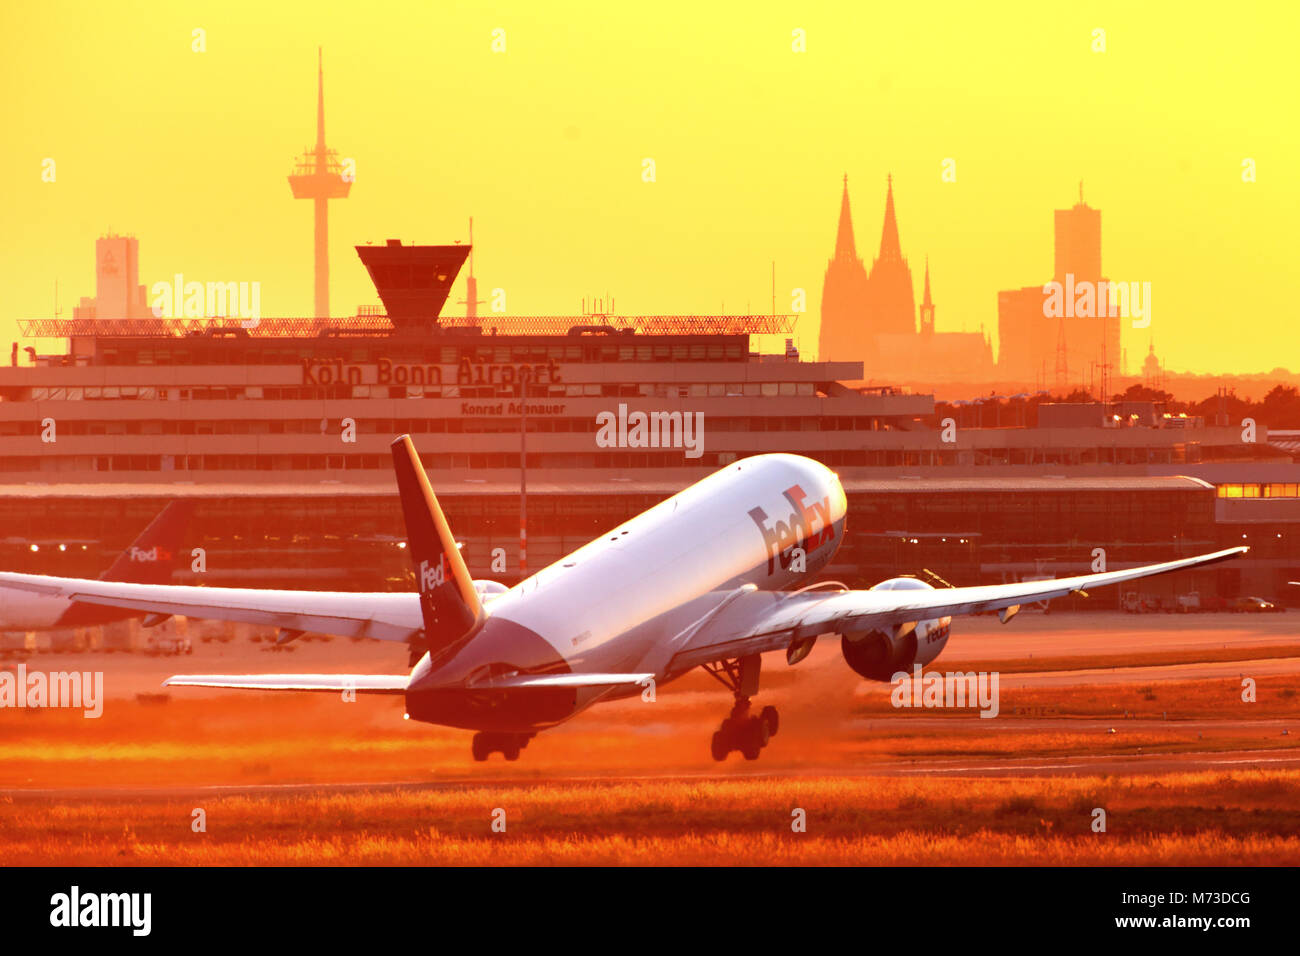 Plane taking off at Cologne/Bonn Airport before sunset Stock Photo